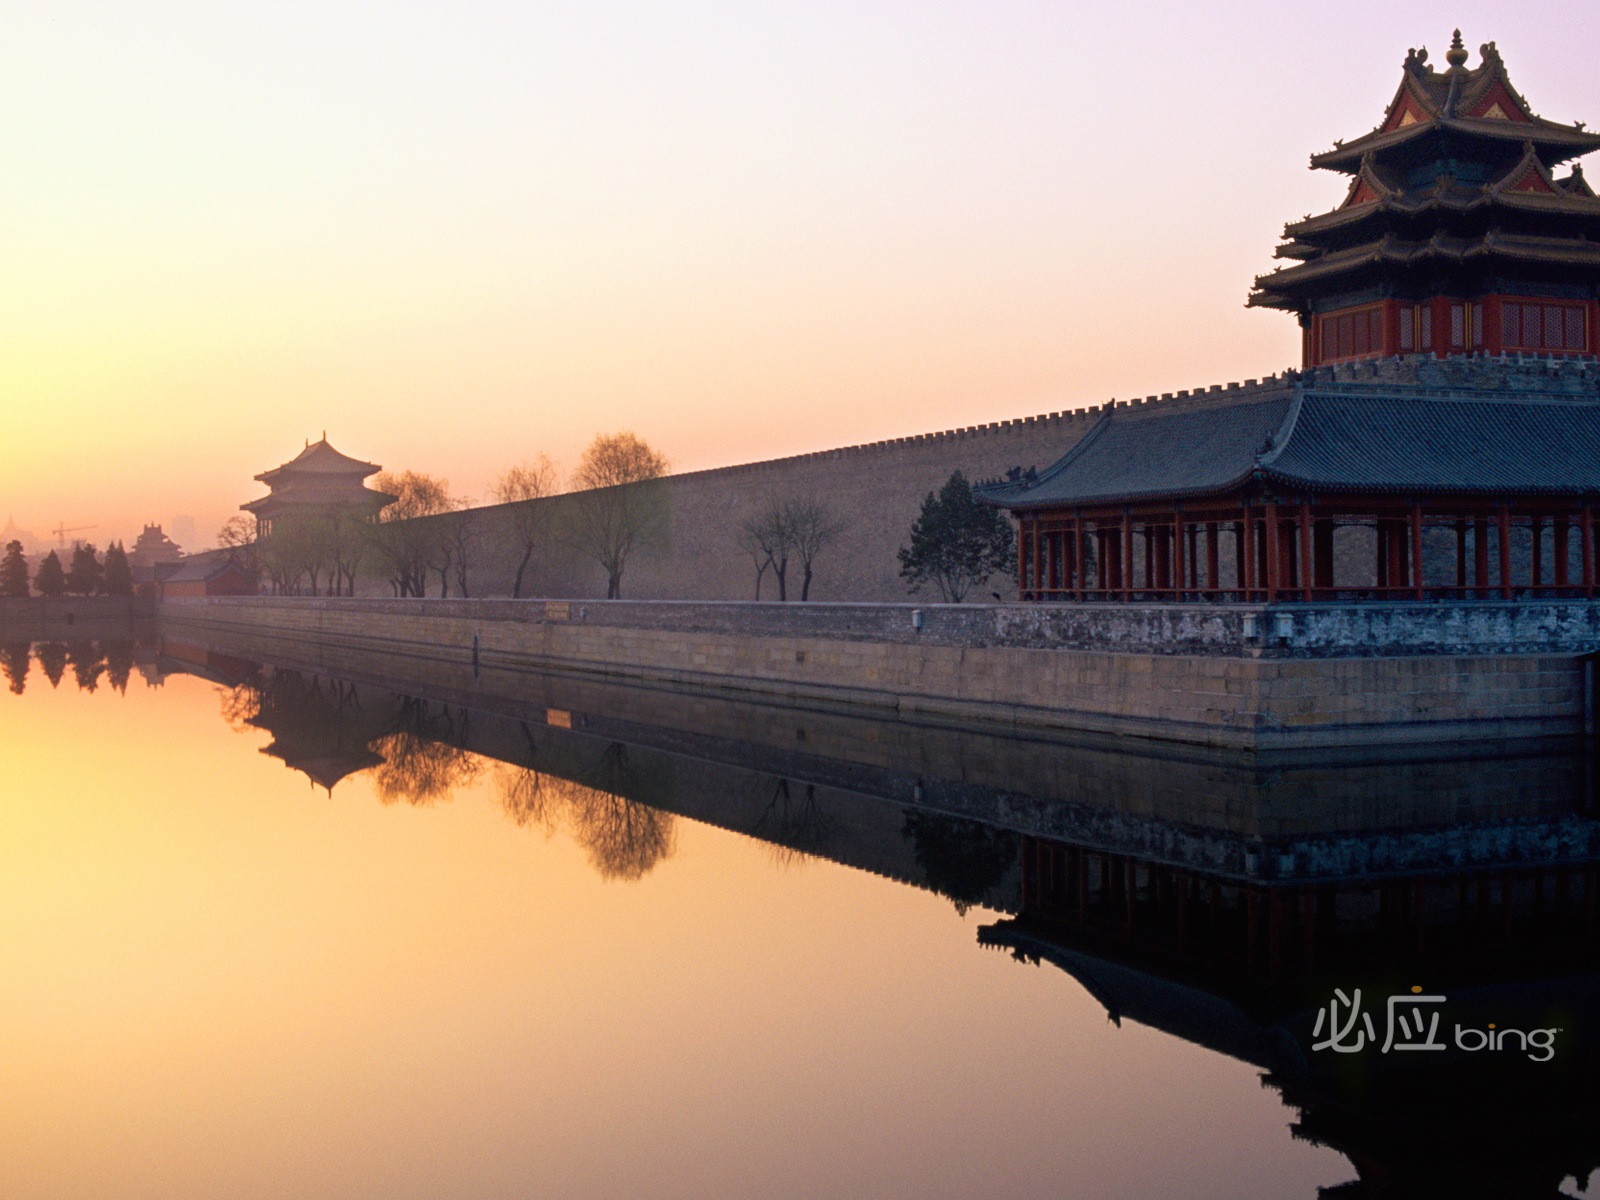 Bing selection best HD wallpapers: China theme wallpaper (2) #5 - 1600x1200